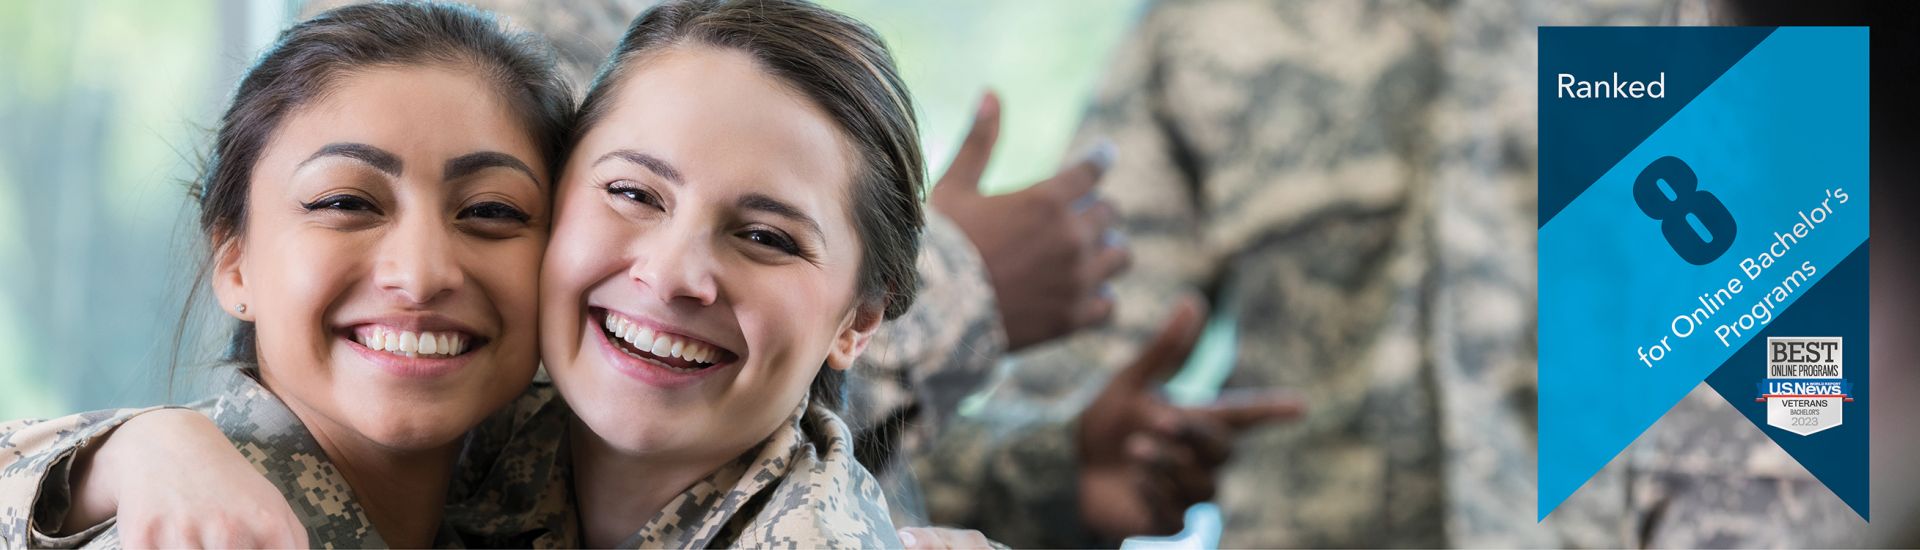 two people in military fatigues hugging and smiling | banner overlaid that reads "Ranked 8 for online bachelor's programs"